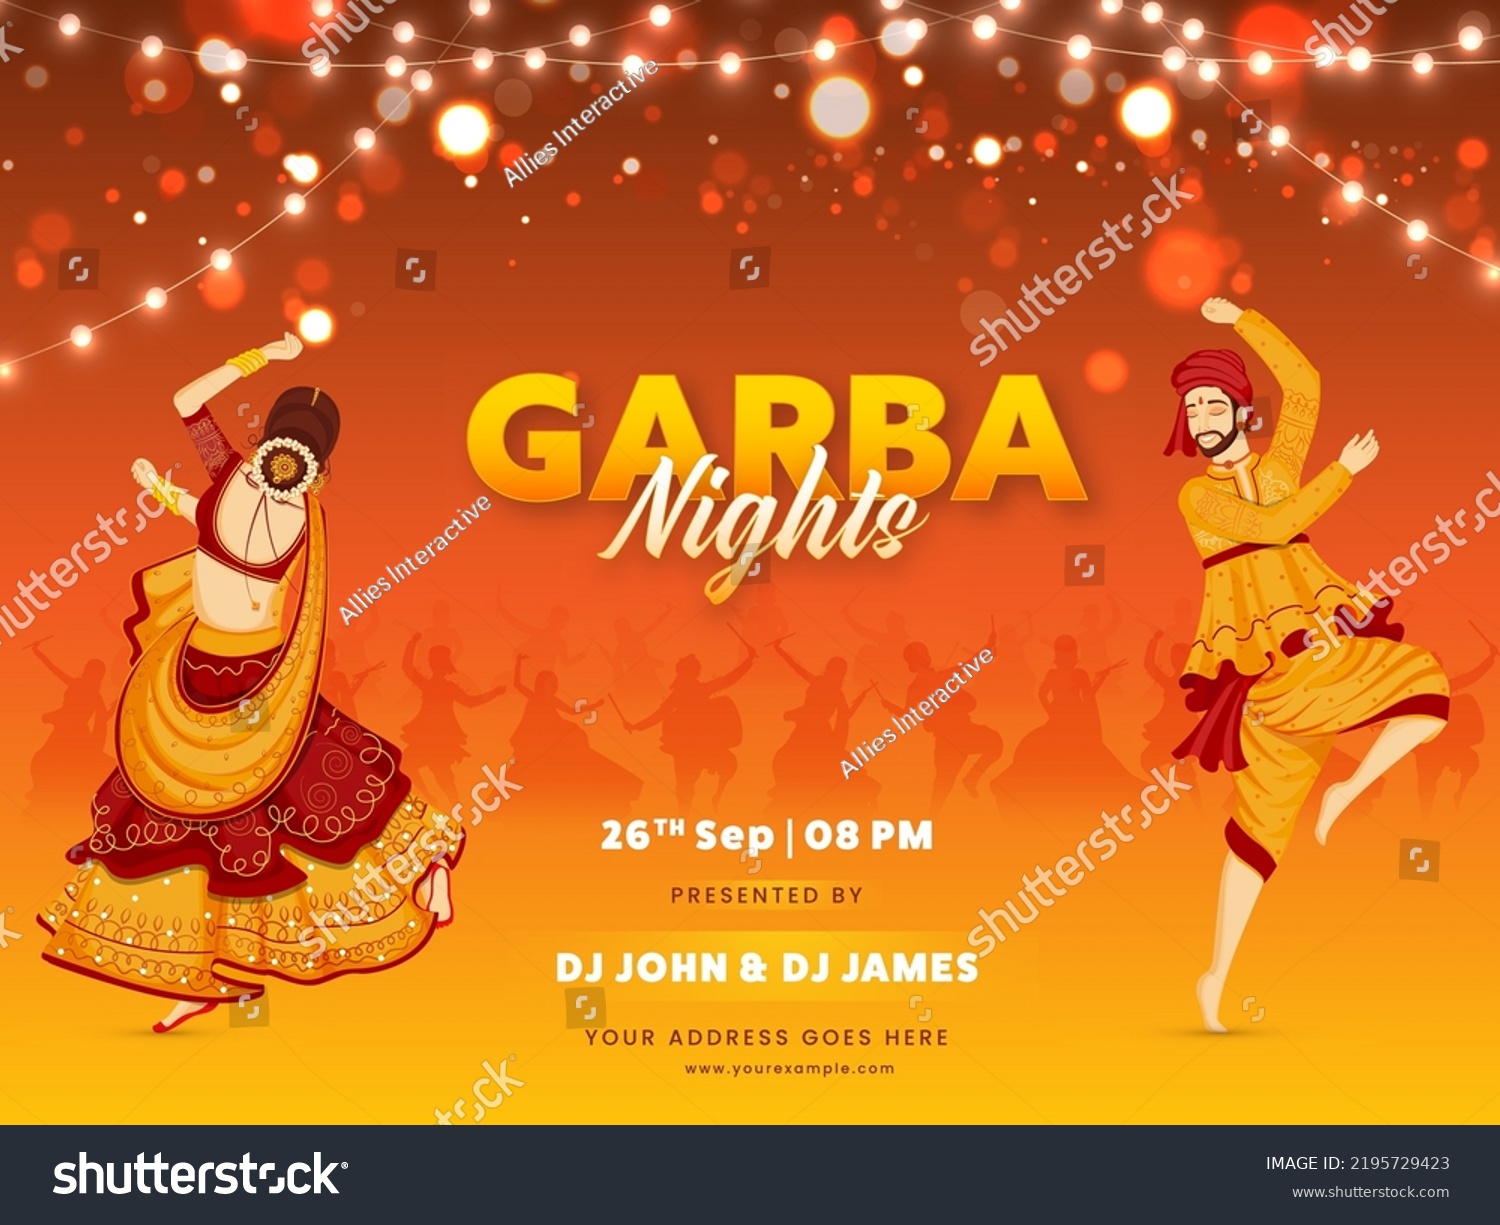 SVG of Garba Night Party Celebration Background With Indian Young Couple Dancing And Event Details. svg